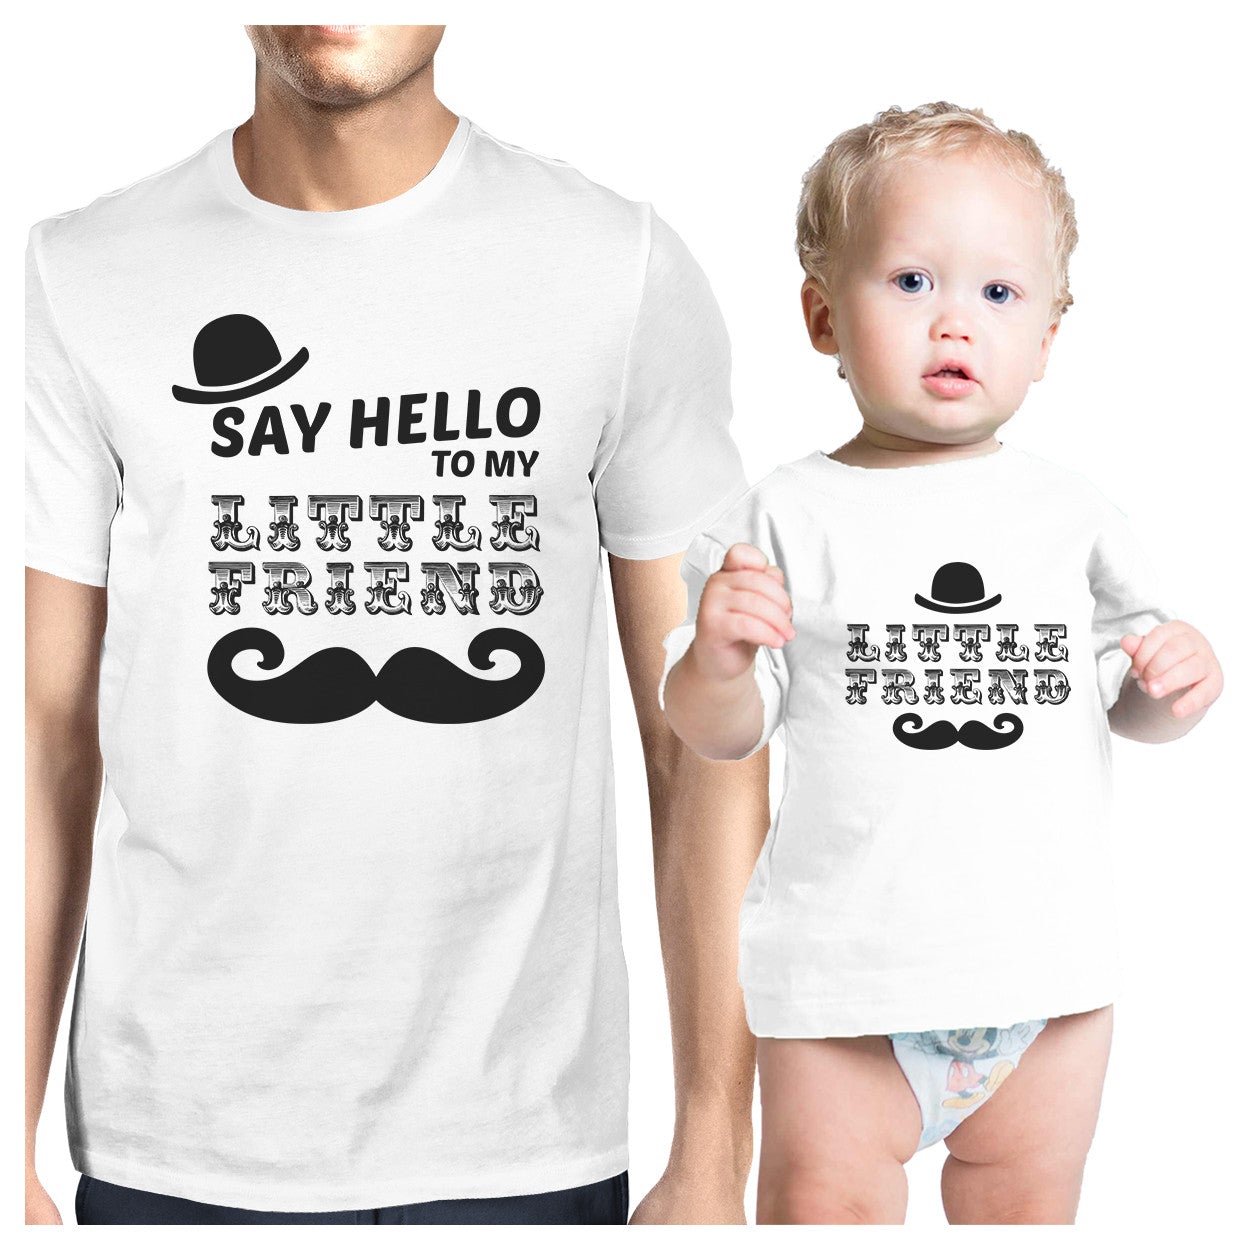 Say Hello To My Little Friend Mustache Dad and Baby Matching White Shirt